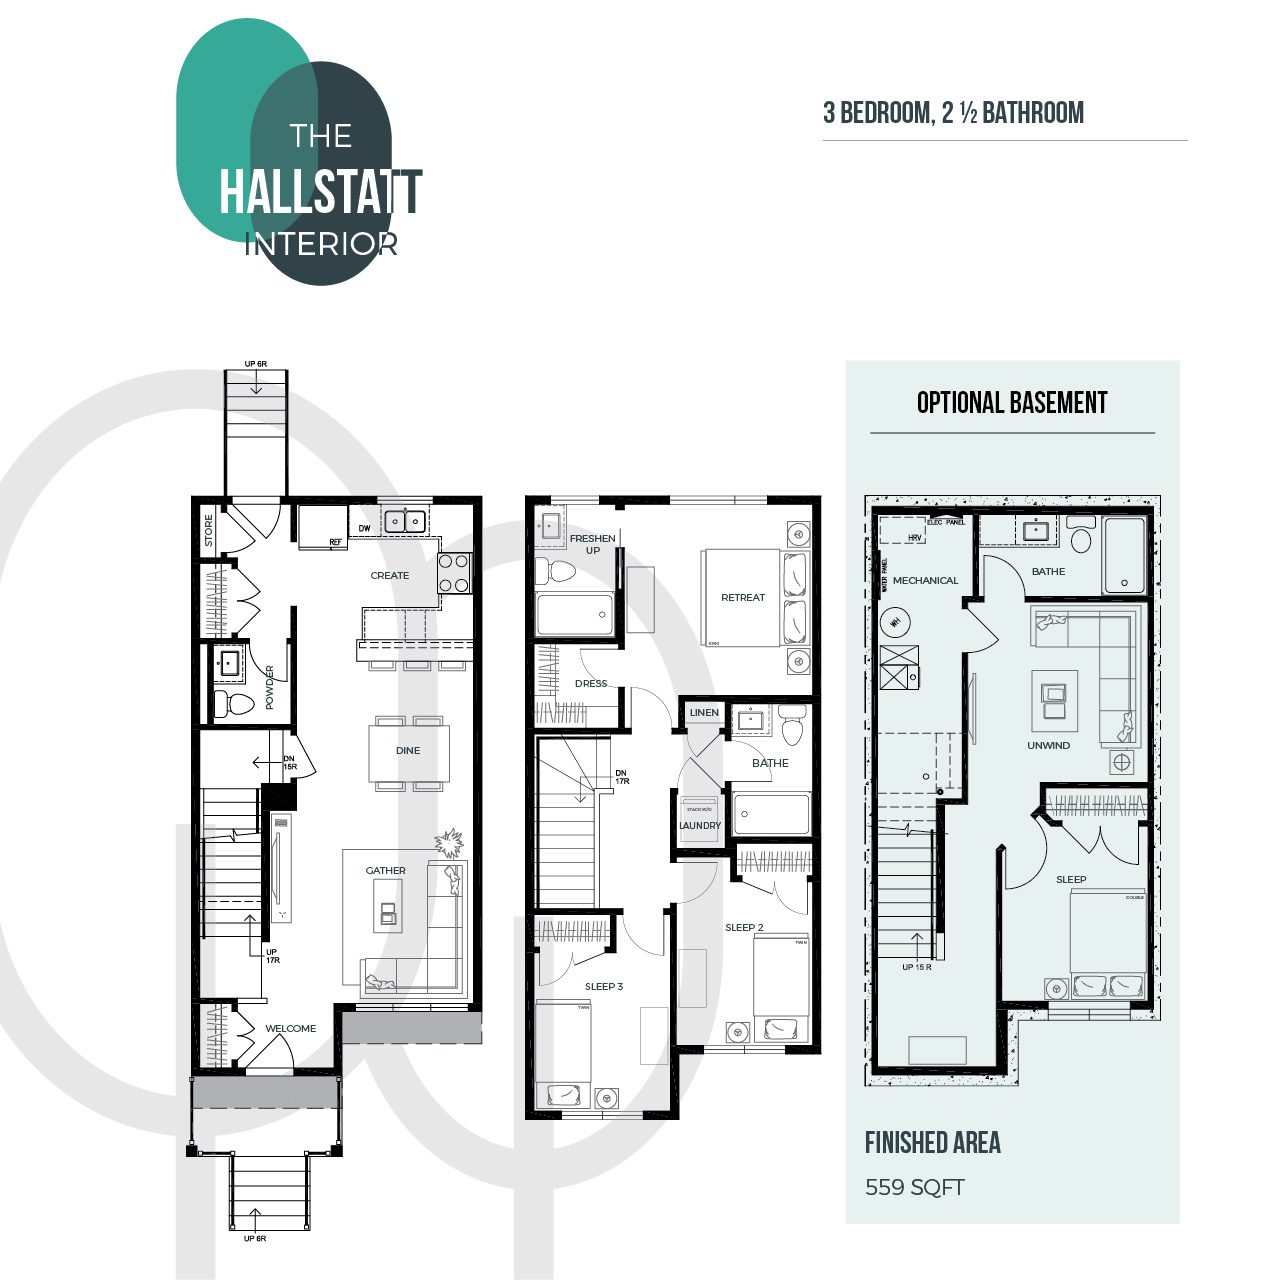 A floor plan of a three bedroom, two and a half bathroom, two-storey townhouse.